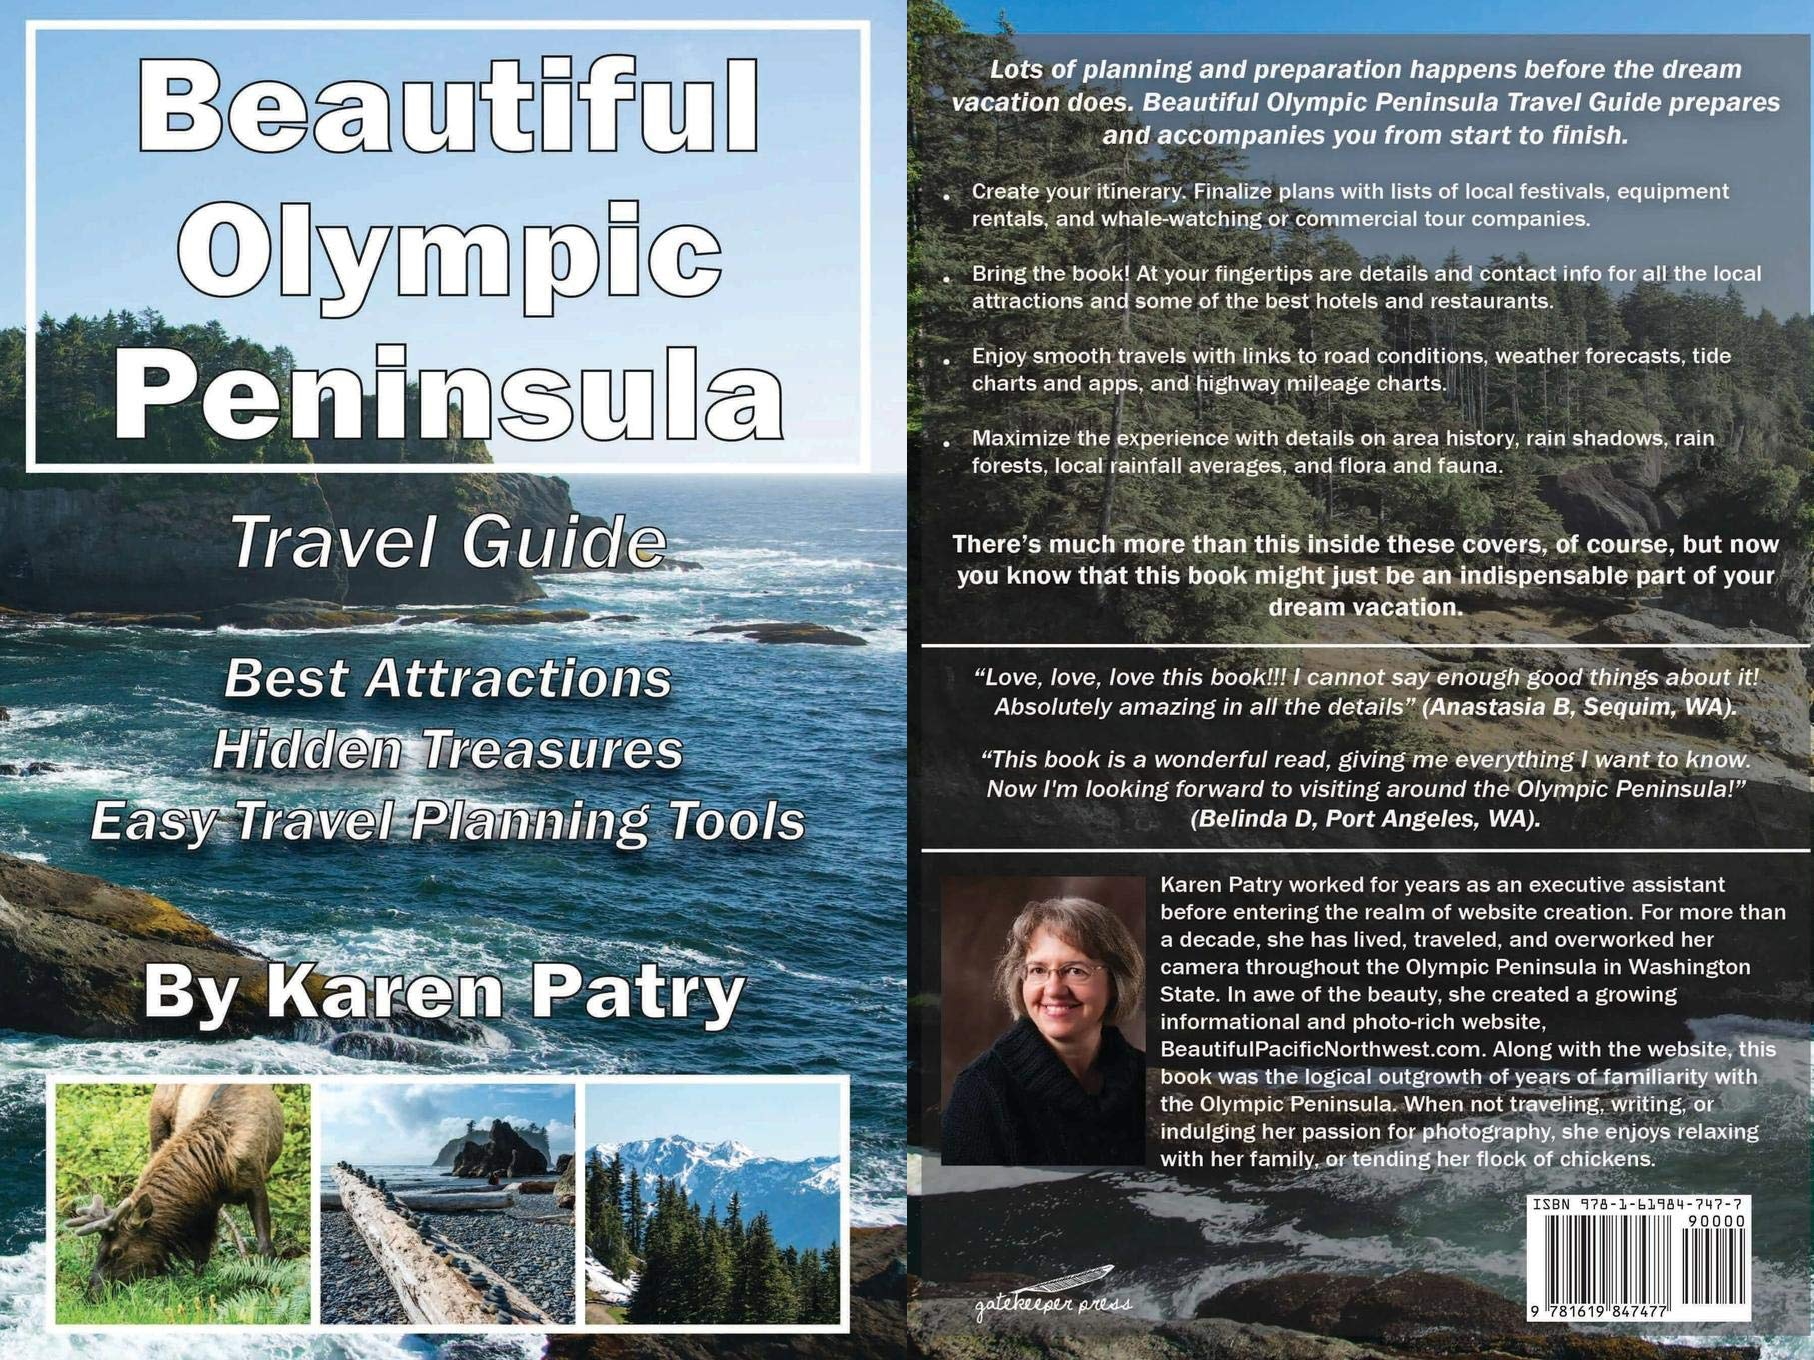 Pacific Coast Highway Travel reviews an Olympic Peninsula Travel Guide published by the Beautiful Pacific Northwest website.